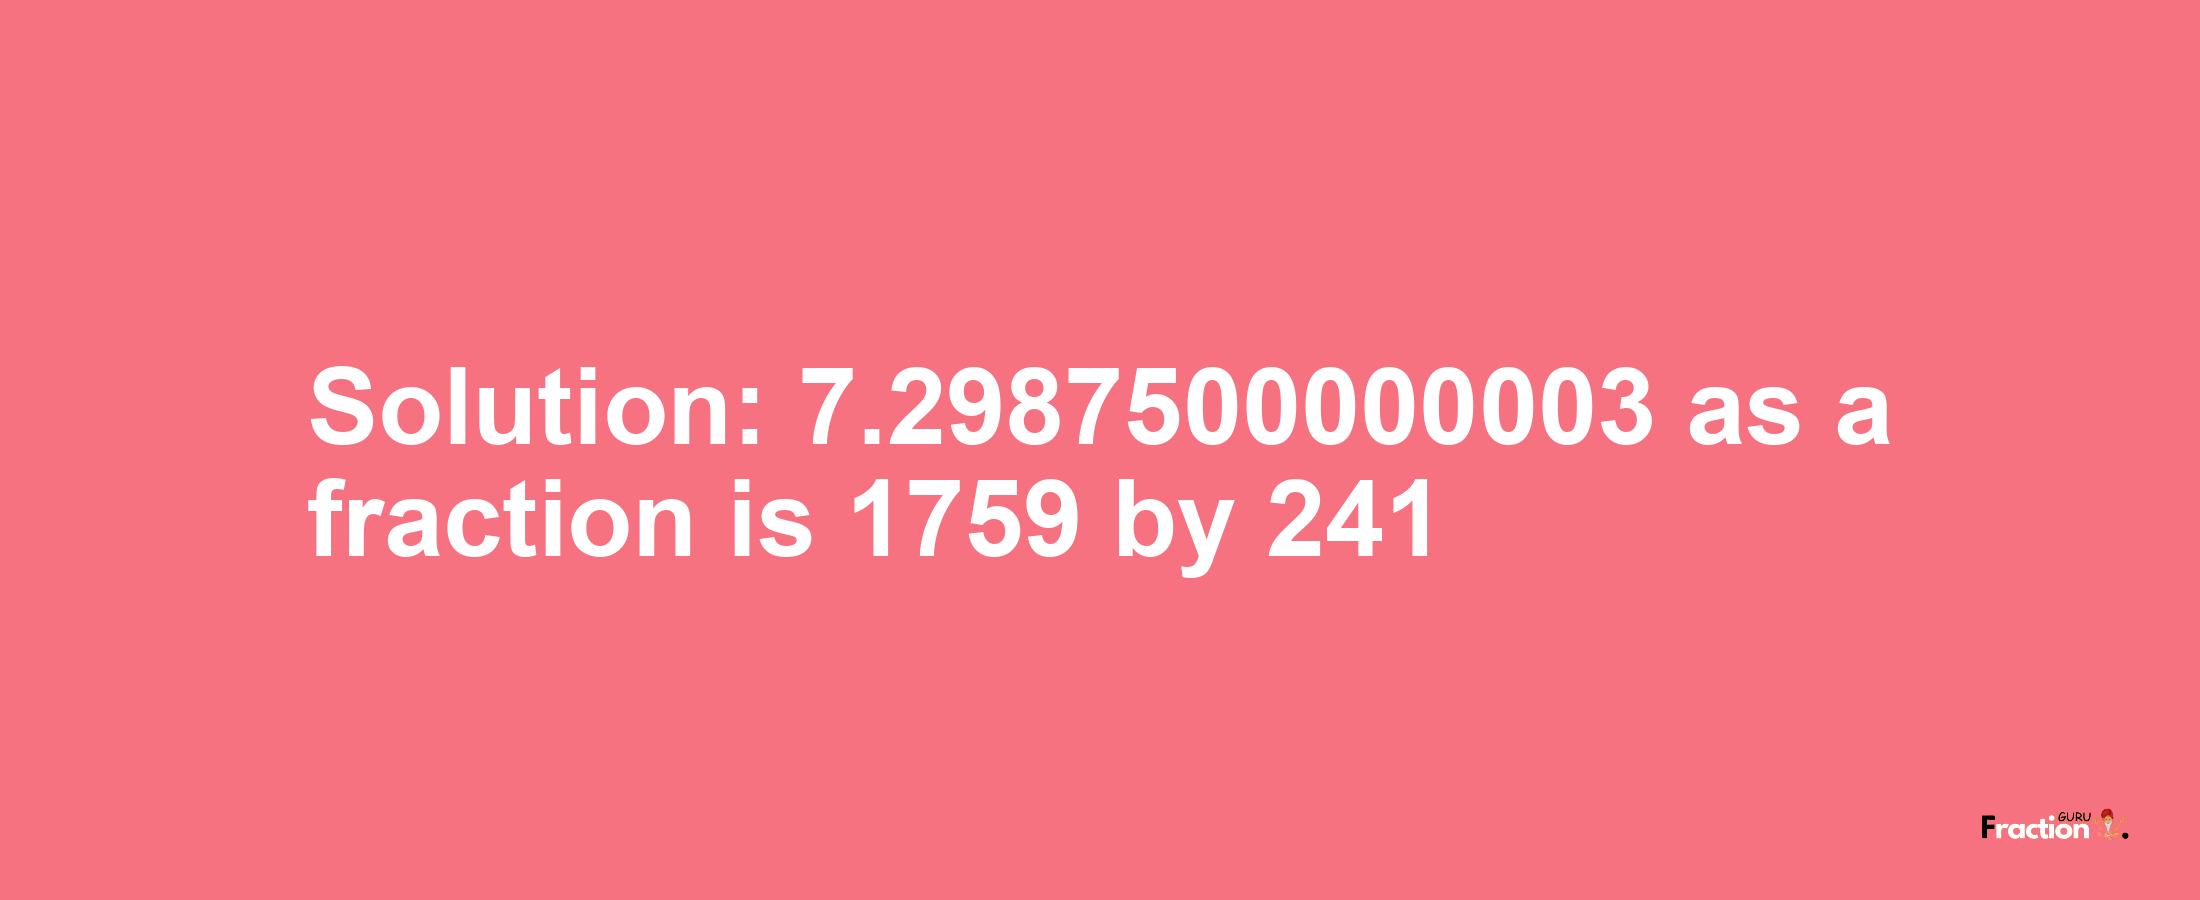 Solution:7.2987500000003 as a fraction is 1759/241